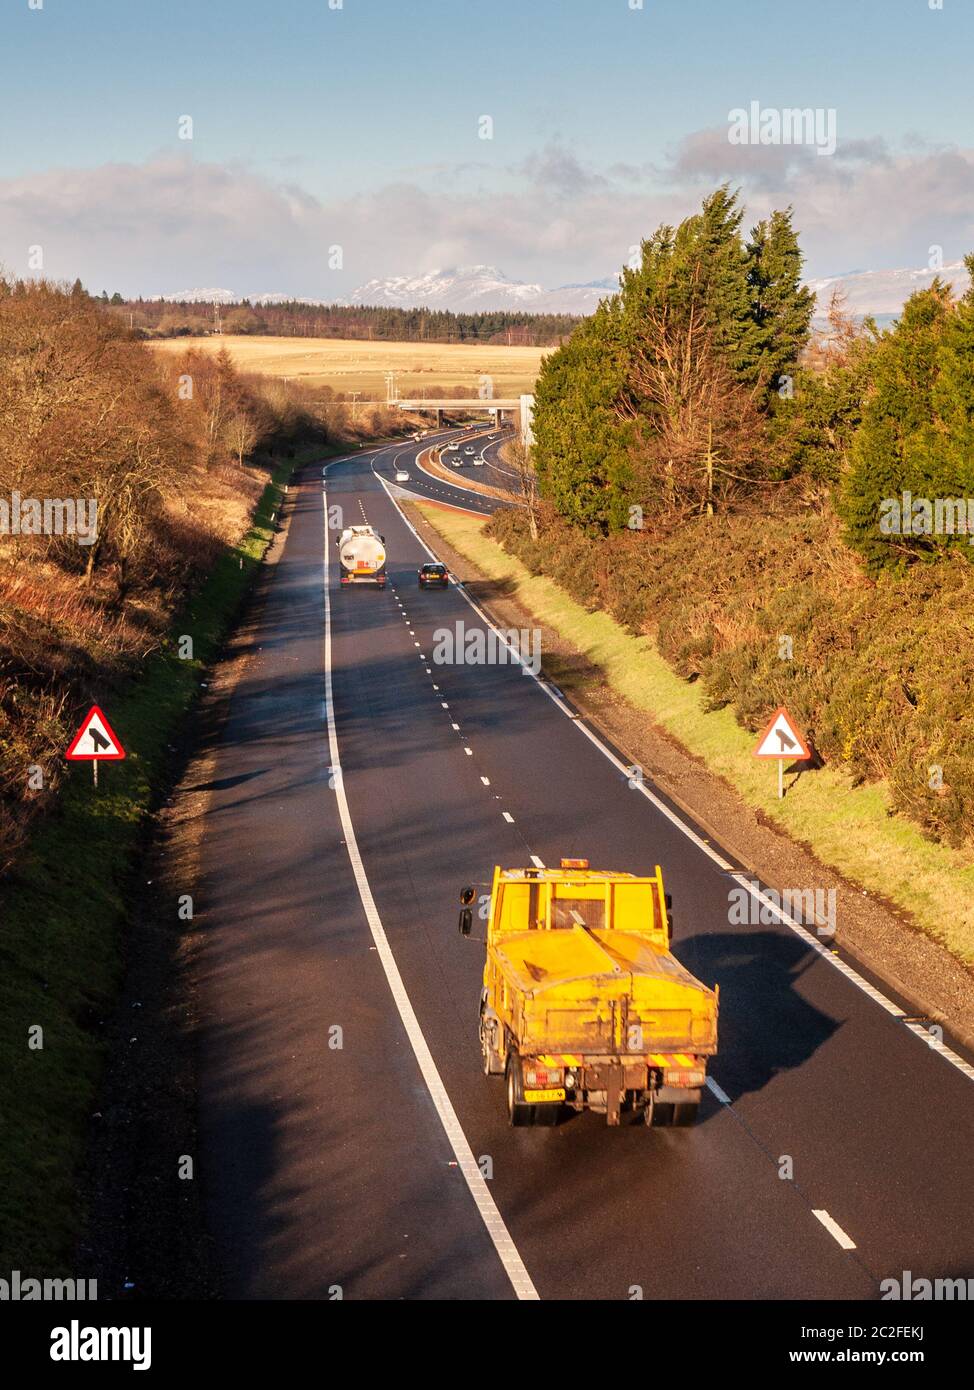 Stirling, Scotland, UK - January 22, 2012: Lorries join the M9 motorway from the M80 at junction 9 near Stirling, with Highland mountains in the dista Stock Photo